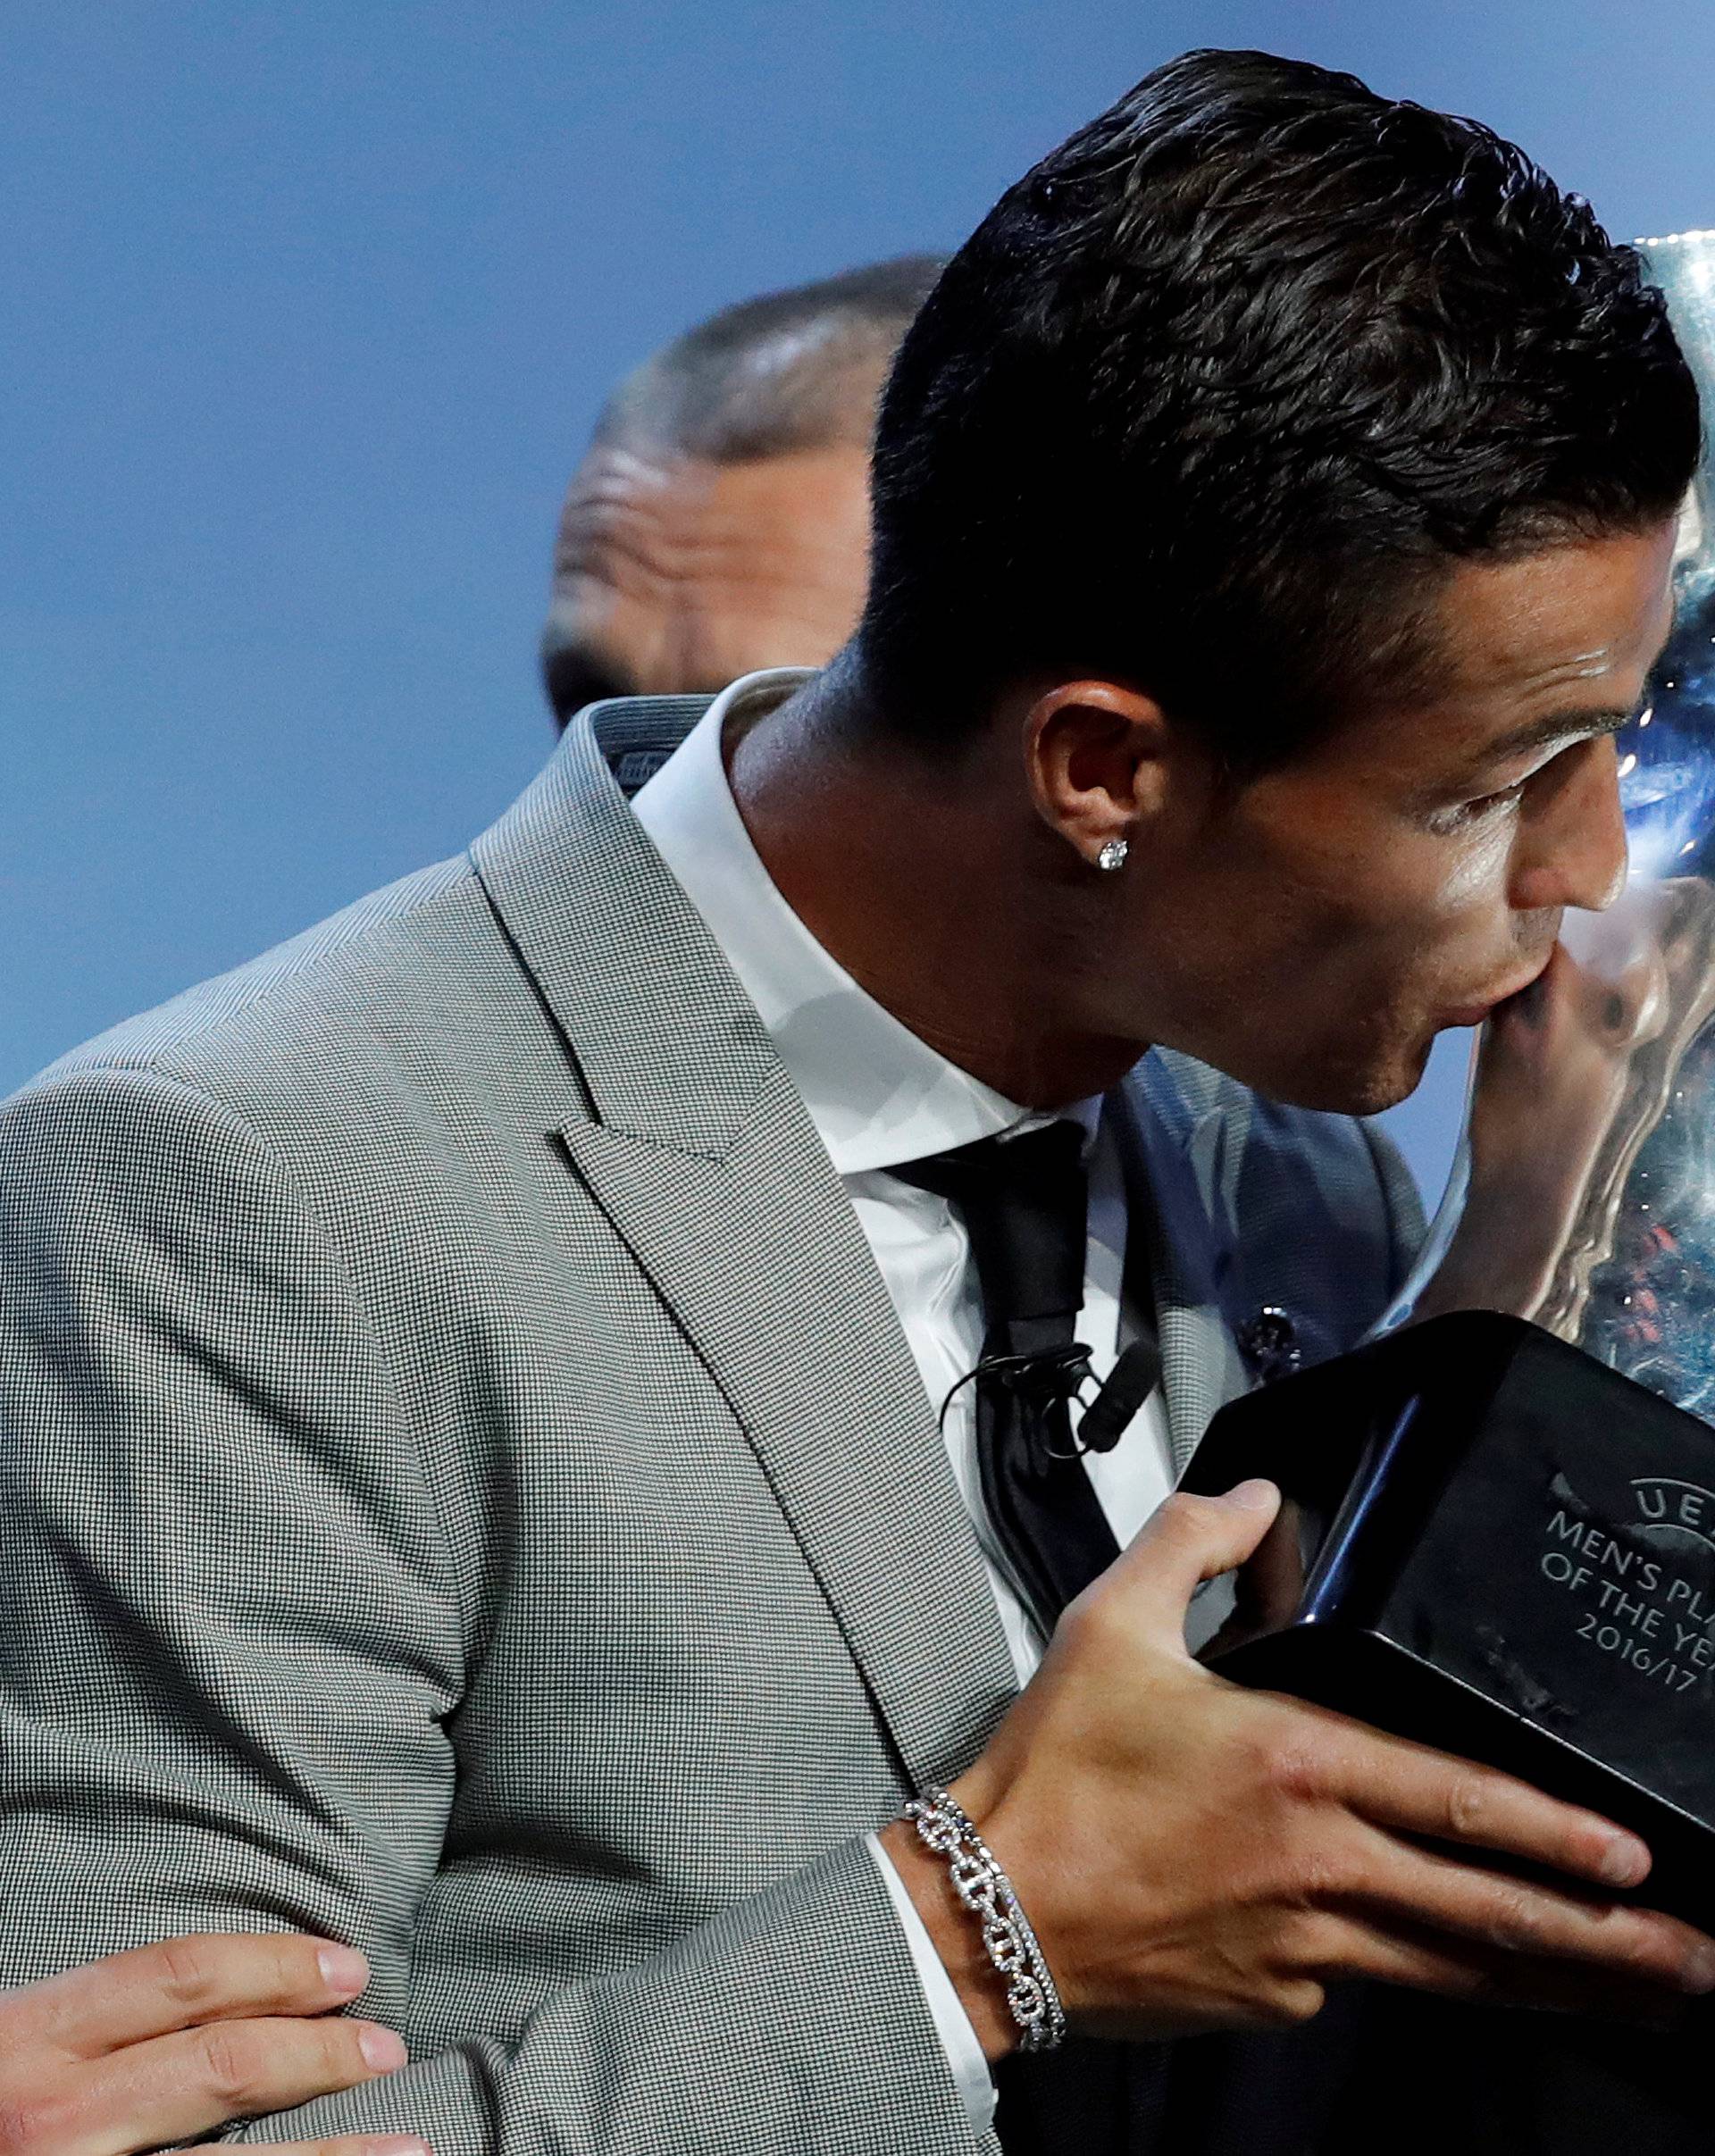 UEFA Player of the Year Awards